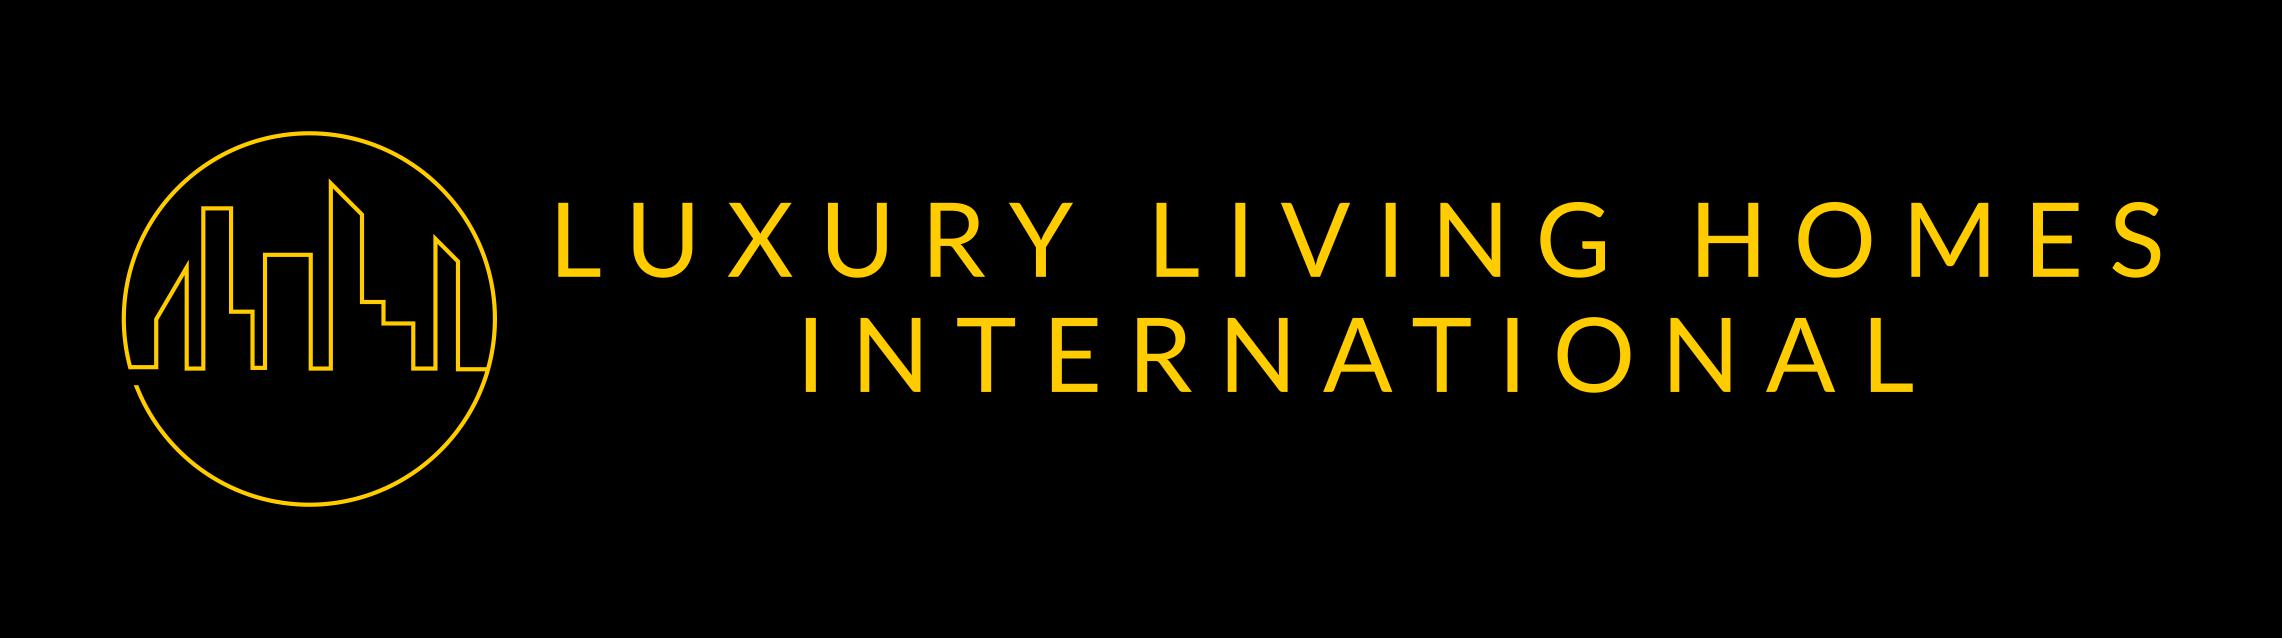 Luxury Living Homes International : Letting agents in Streatham Greater London Lambeth